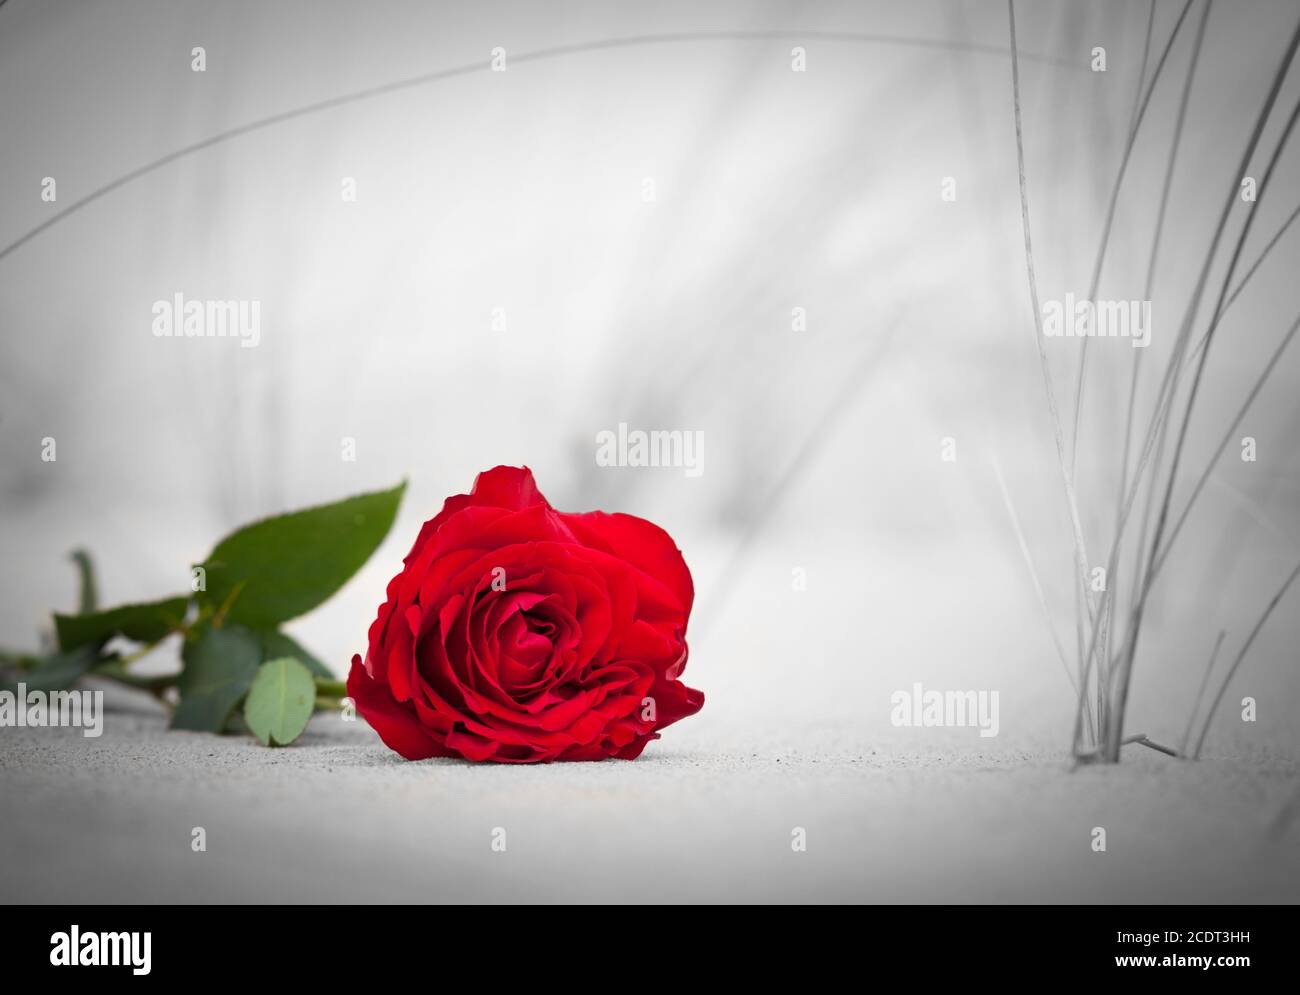 Red rose on the beach. Color against black and white. Love, romance, melancholy concepts. Stock Photo